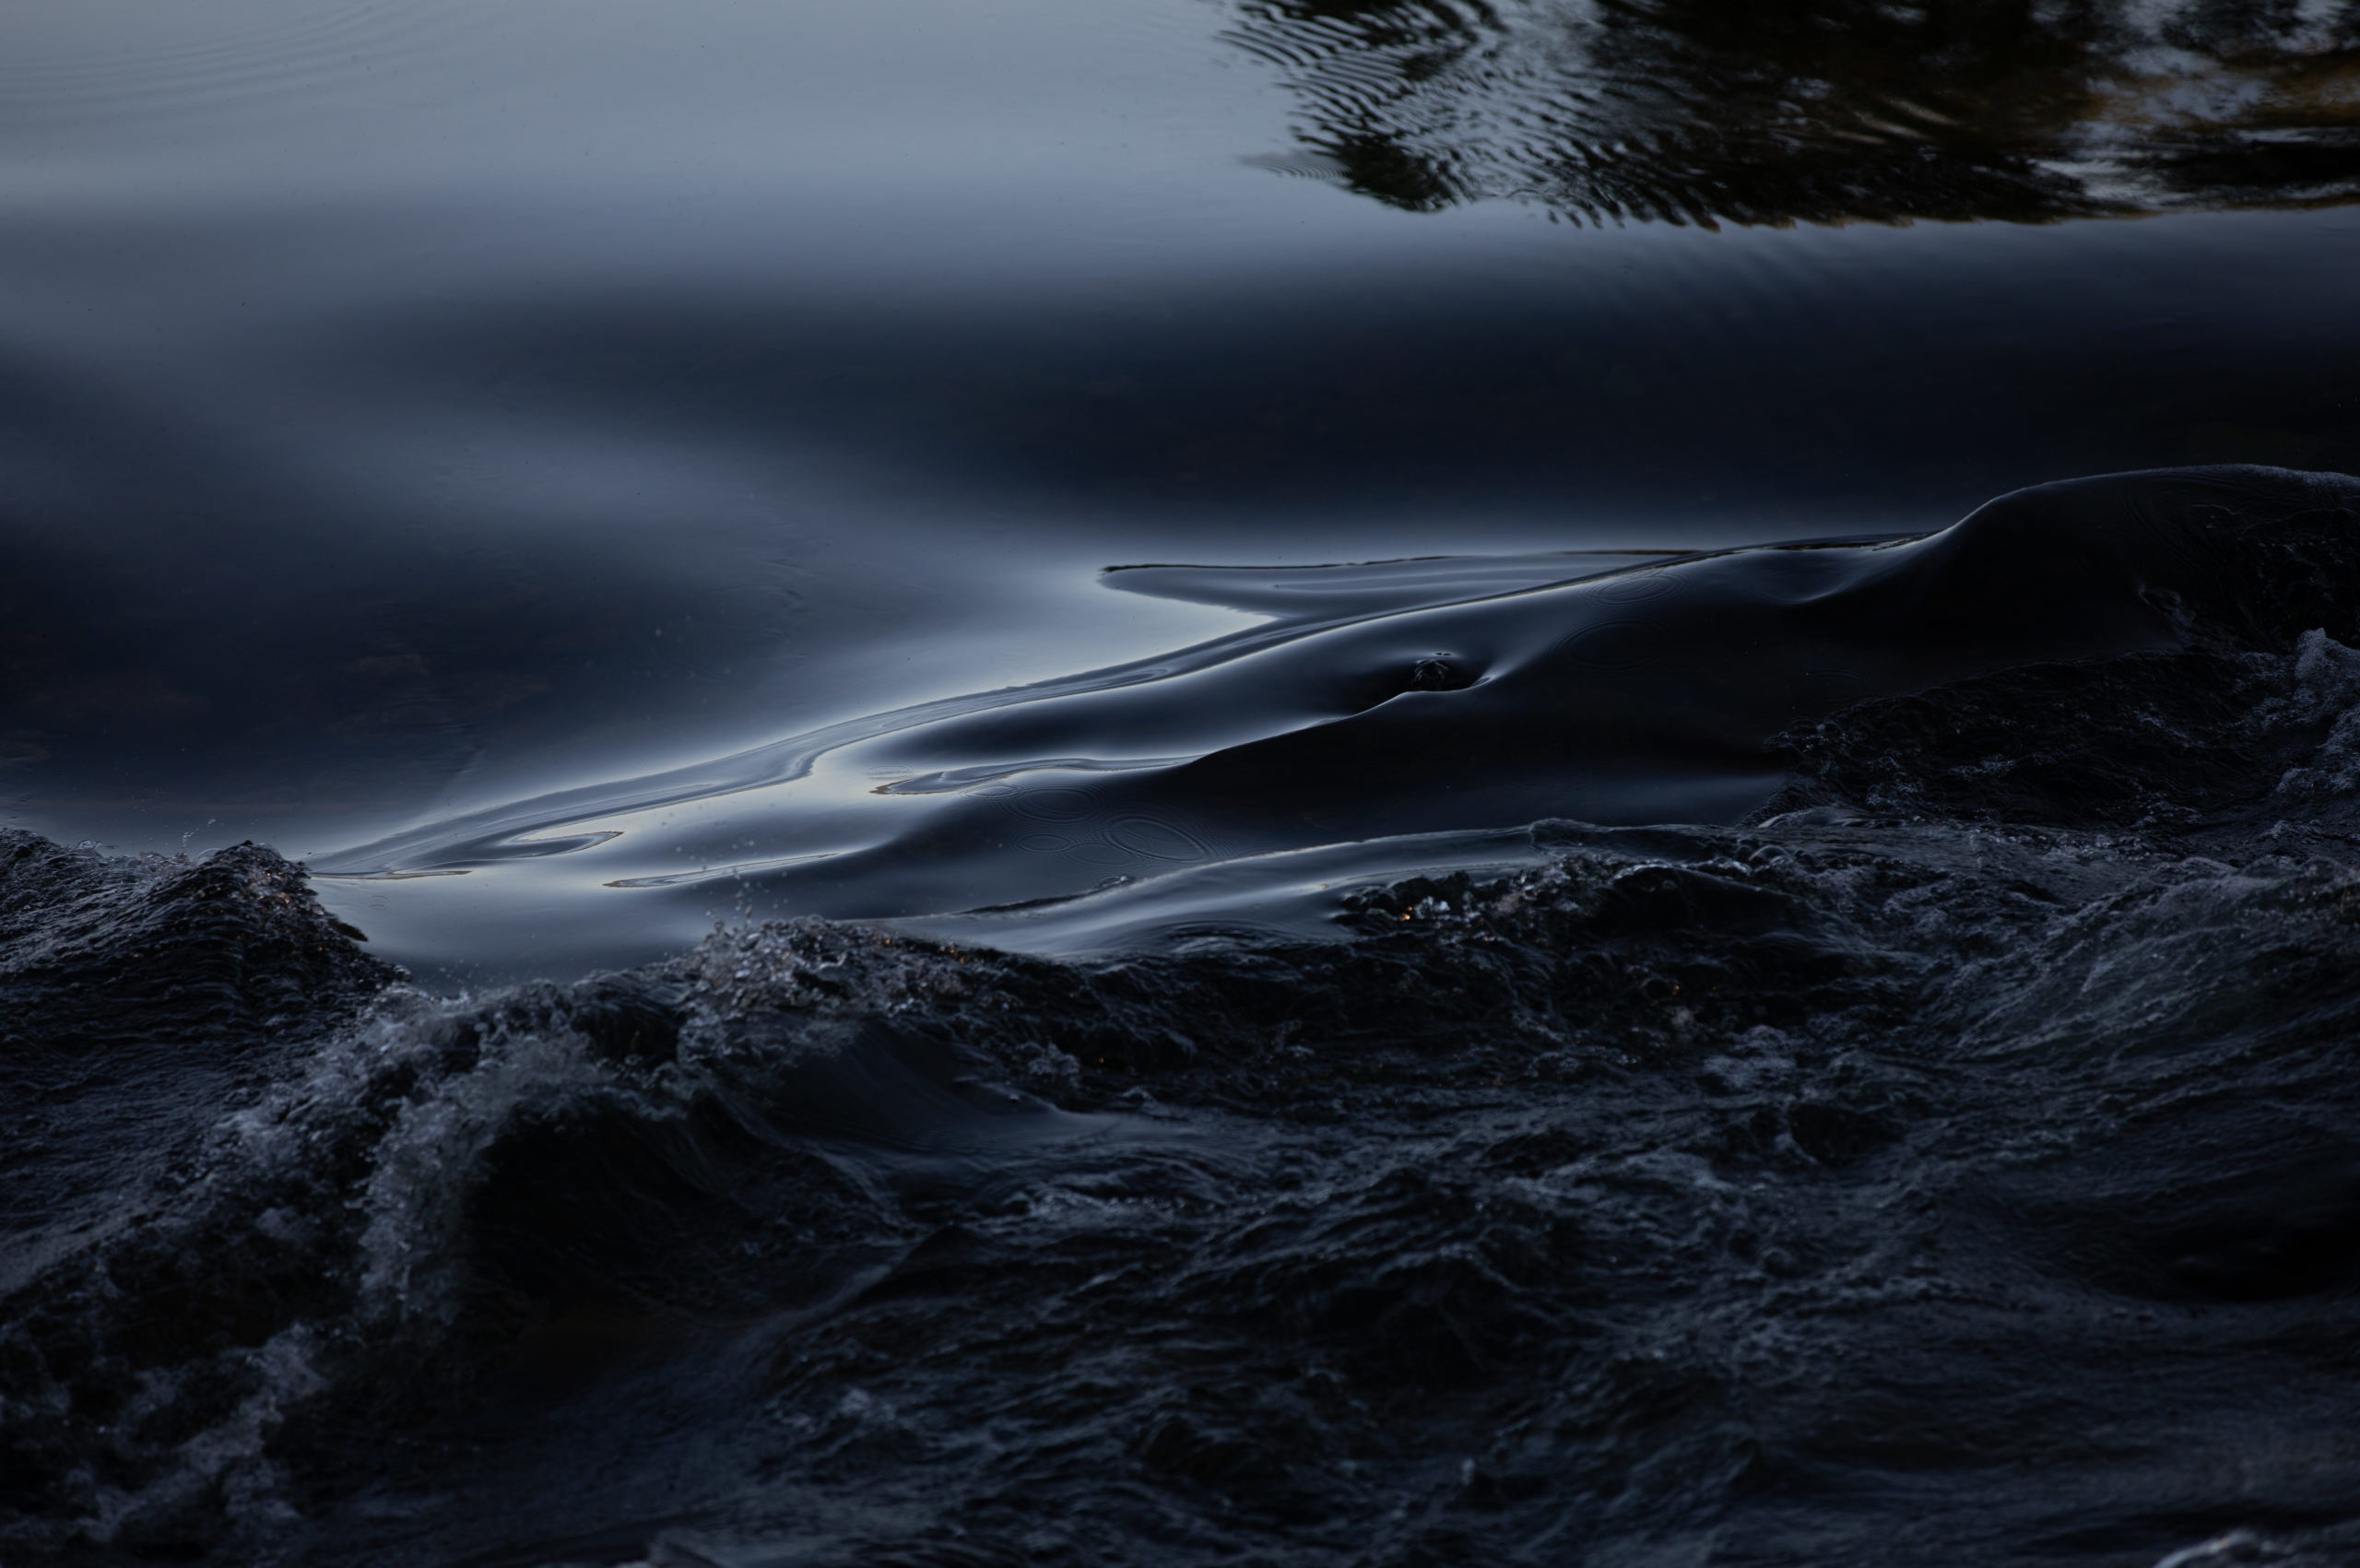 photo is of smooth, glassy water flowing in a stream.